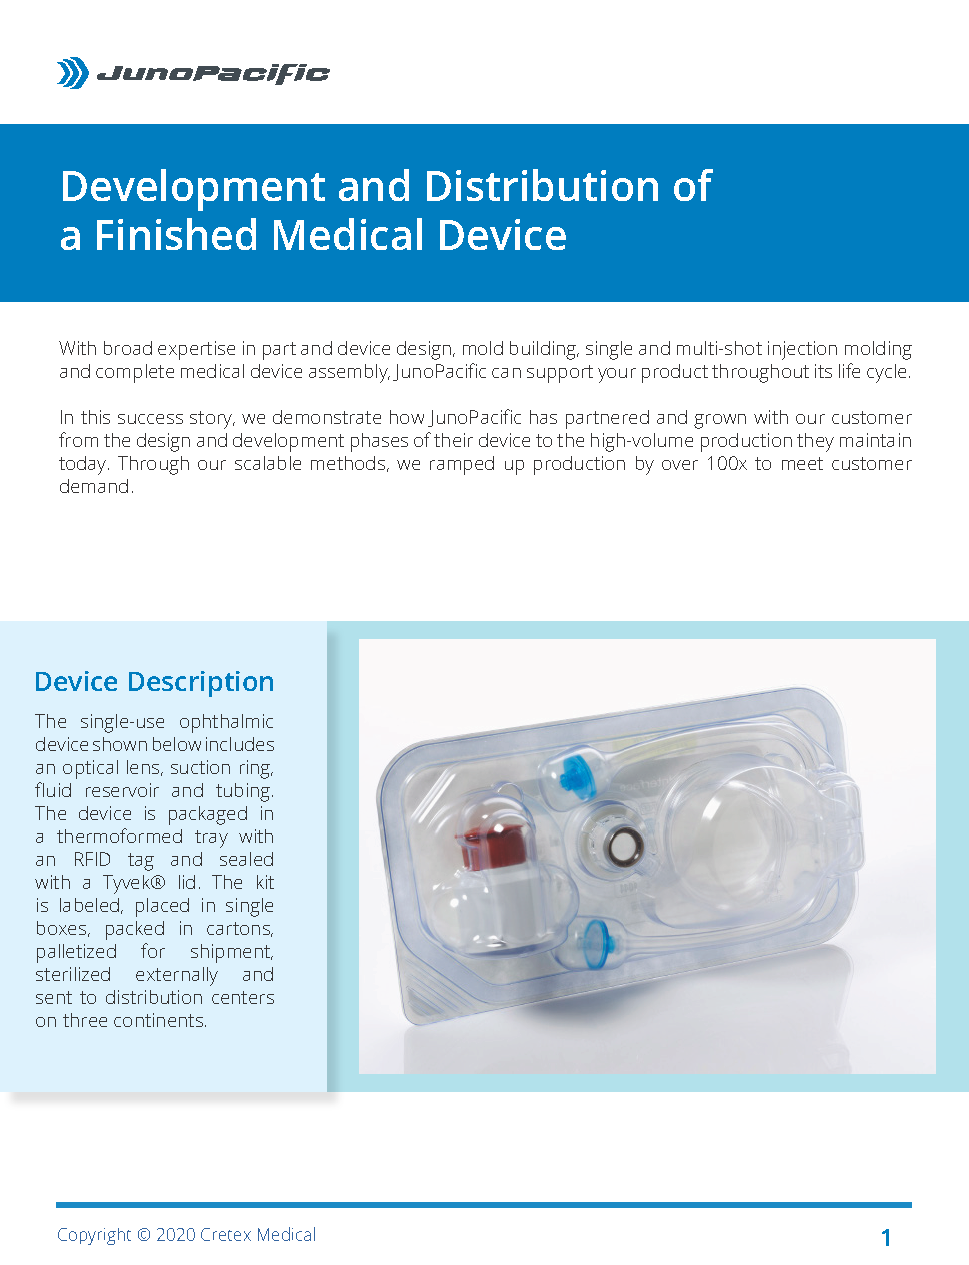 Ophthalmic Device Case Study